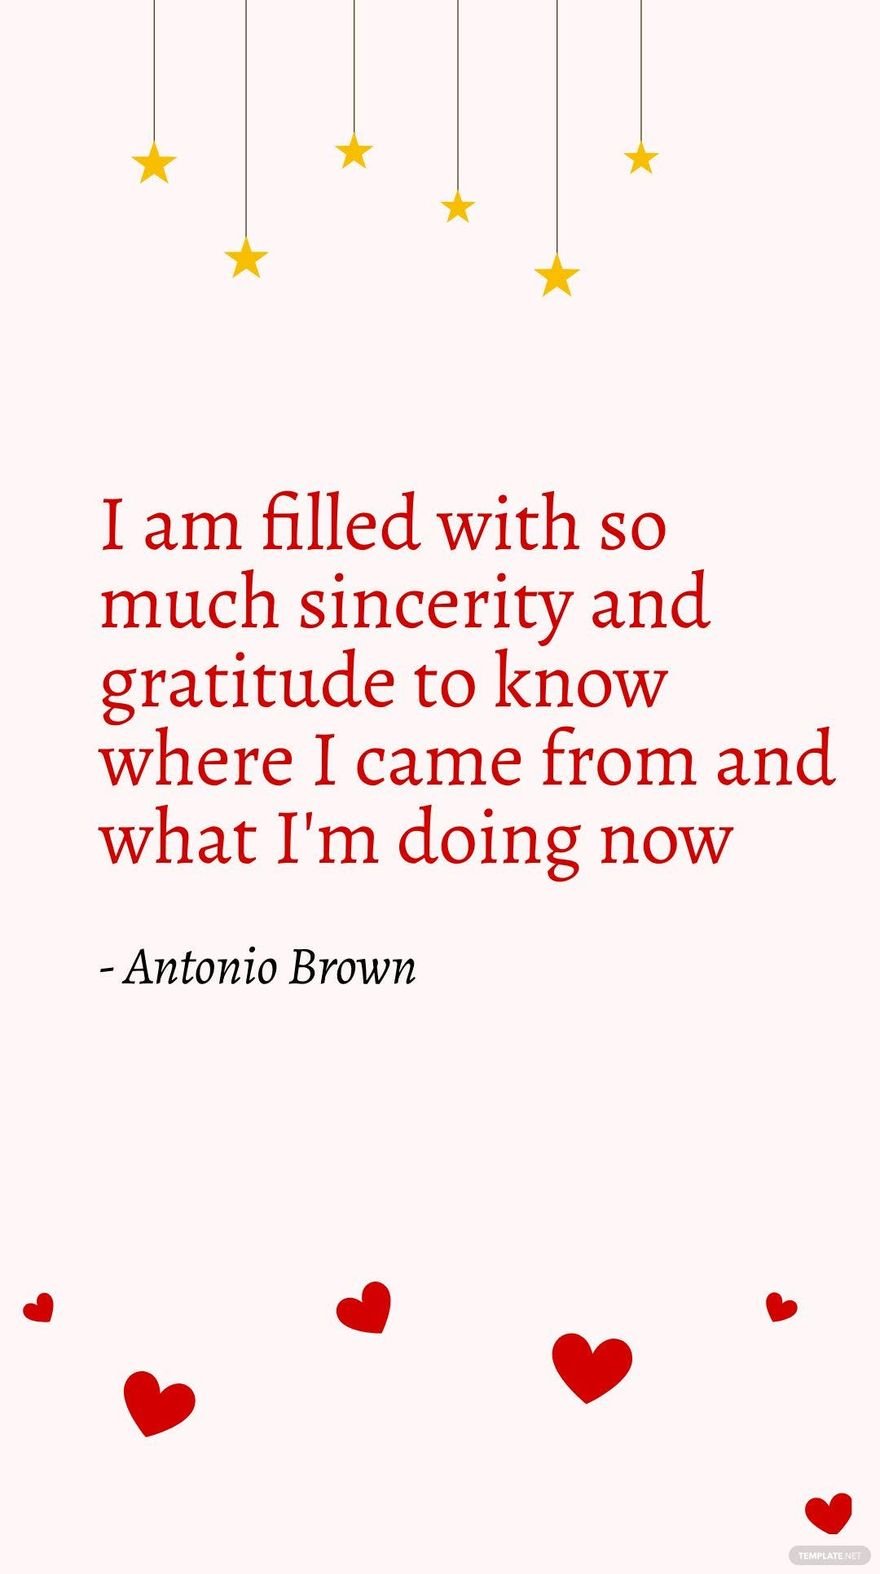 Antonio Brown- I am filled with so much sincerity and gratitude to know where I came from and what I'm doing now